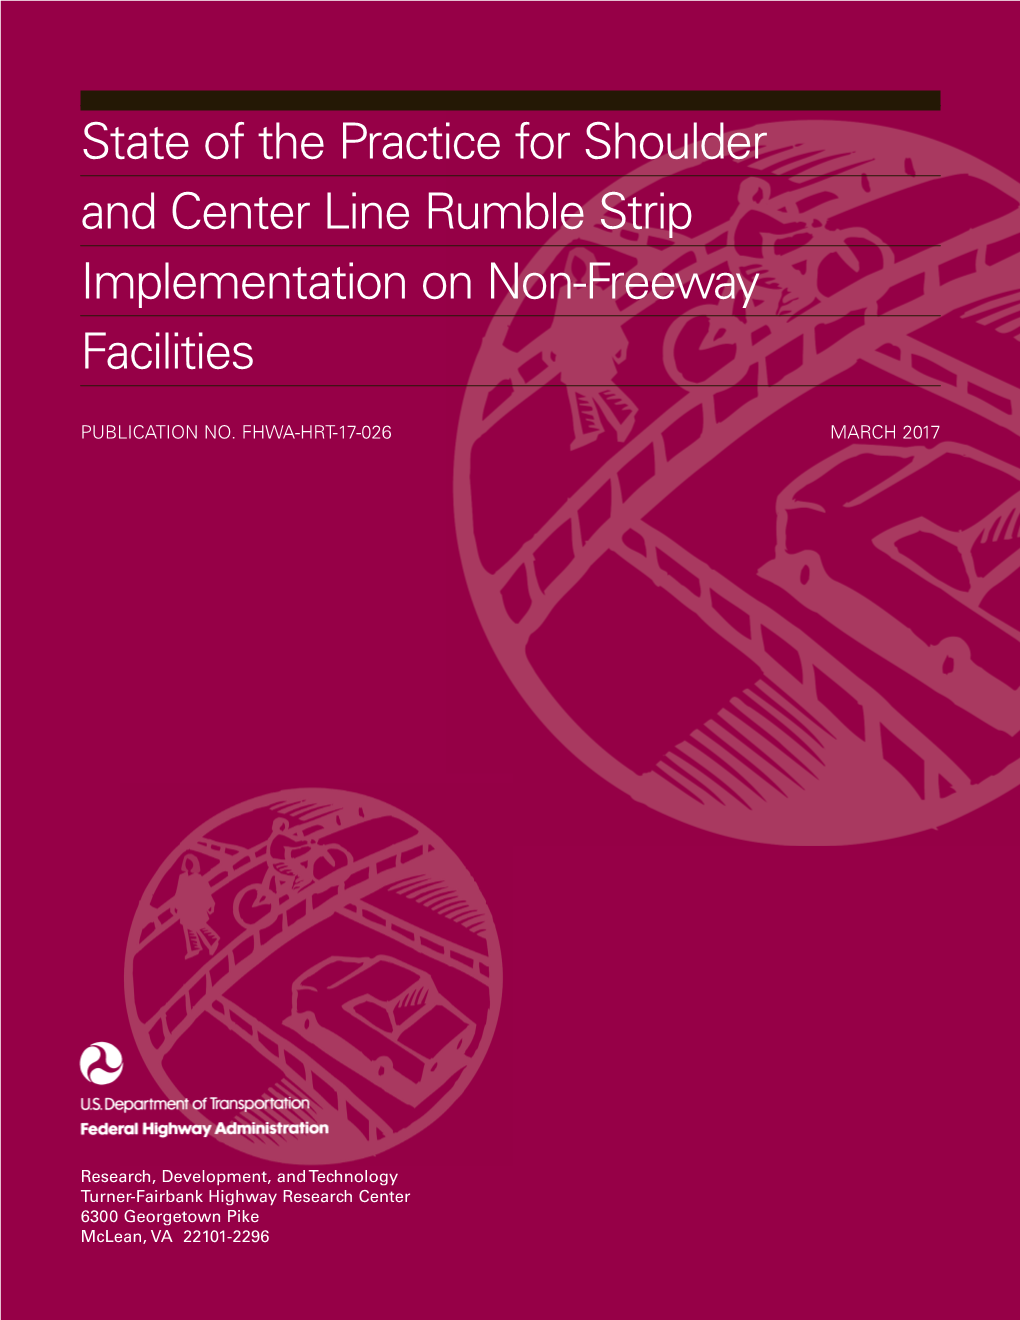 State of the Practice for Shoulder and Center Line Rumble Strip Implementation on Non-Freeway Facilities